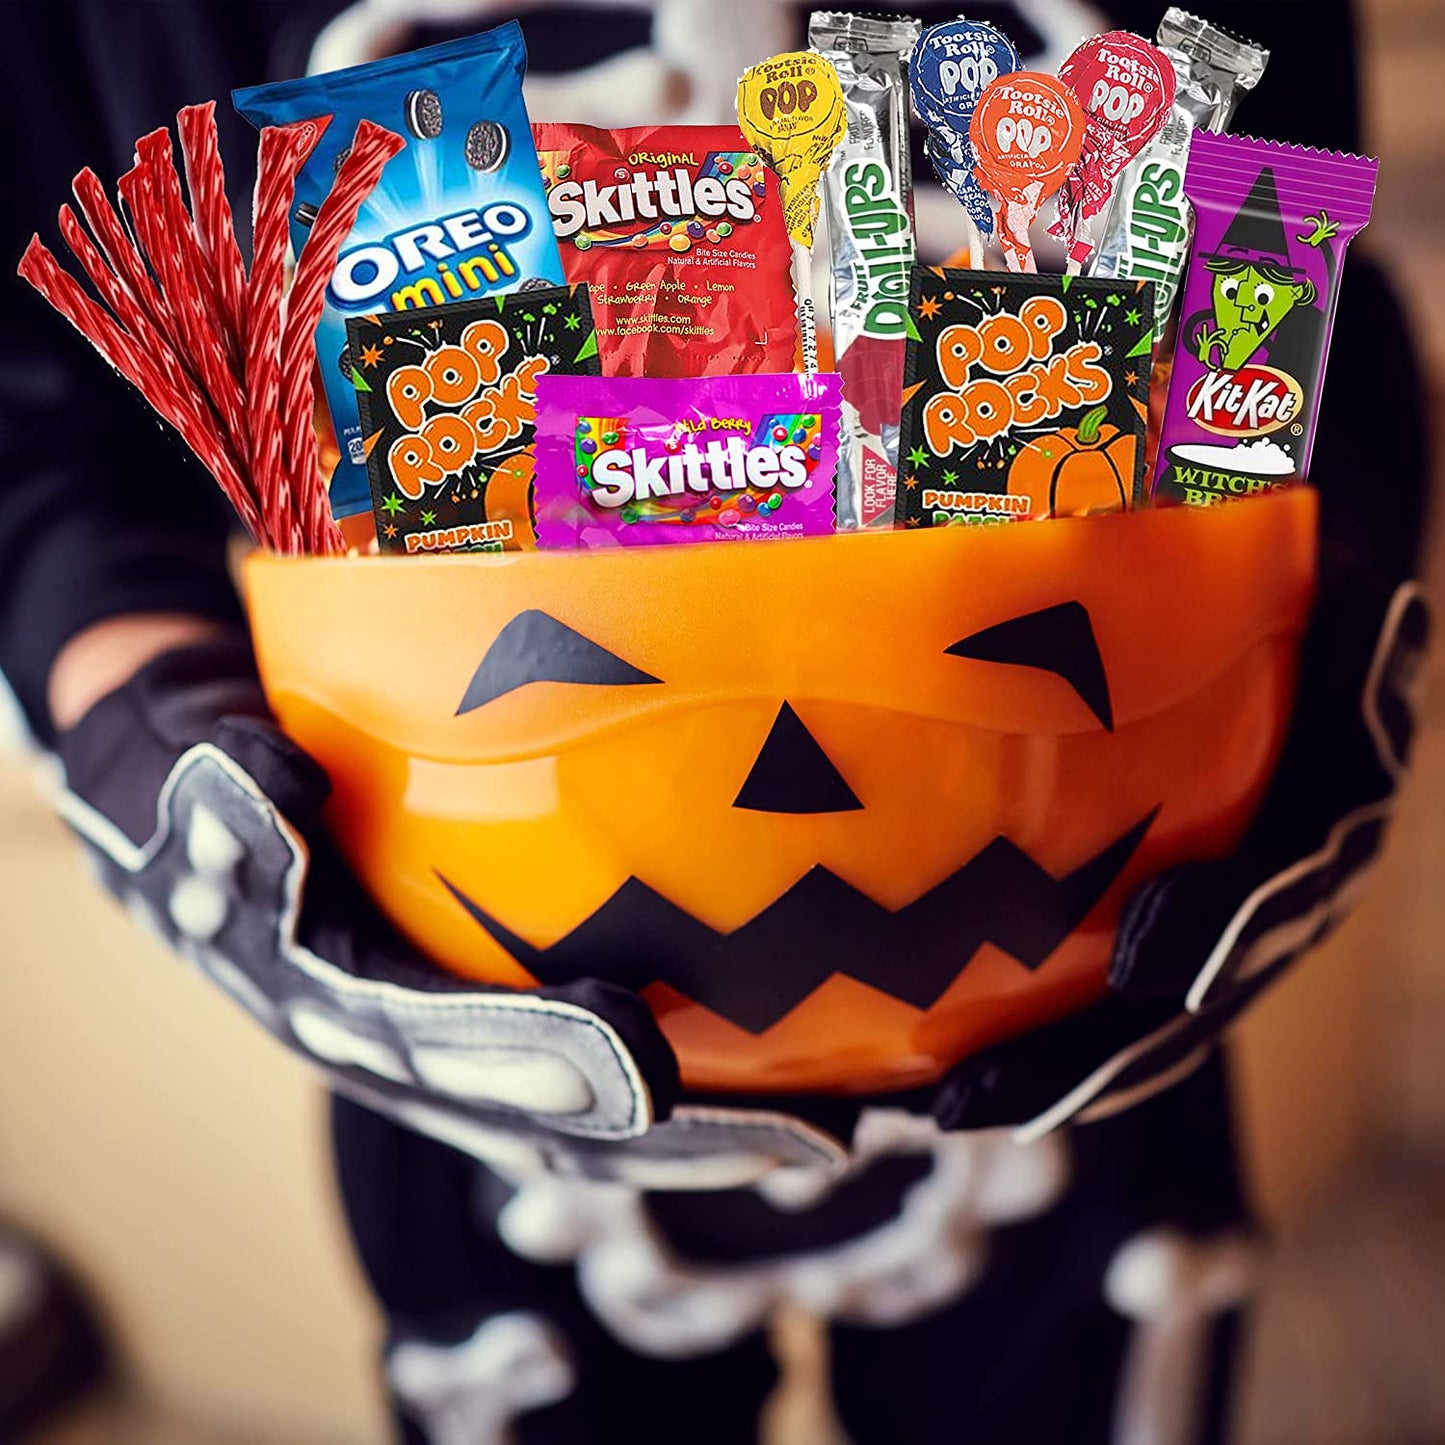 Halloween Care Package Snack box (45) Candy Snacks Assortment Trick or Treat Cookies Food Bars Toys Variety Gift Pack Box Bundle Mixed Bulk Sampler for Children Kids Boys Girls College Students Office